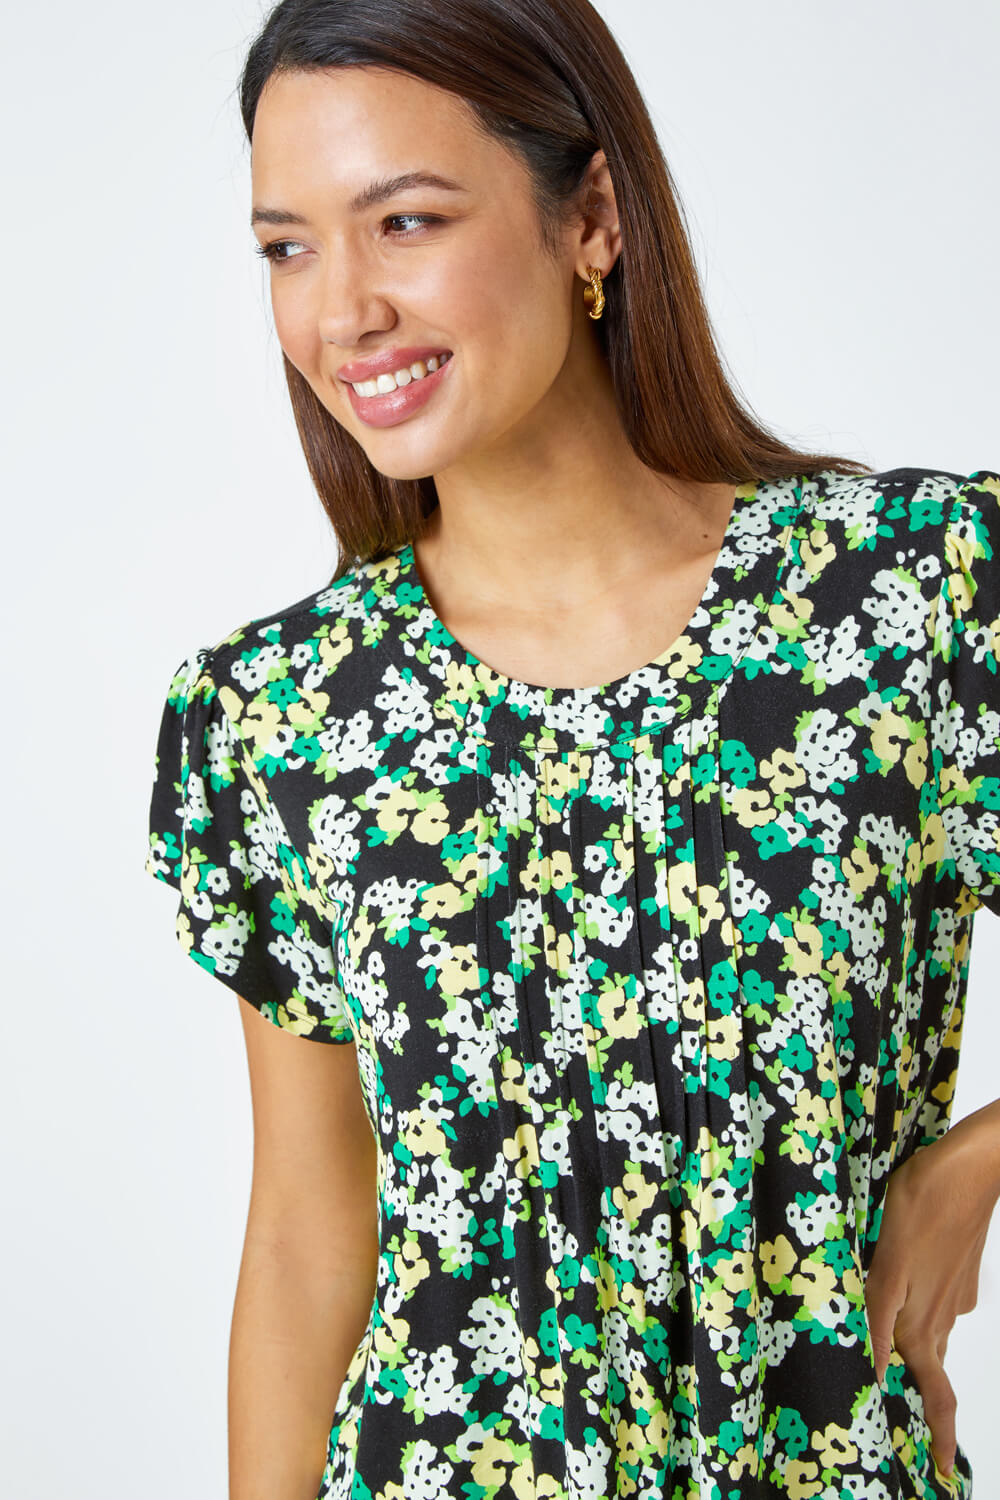 Green Floral Print Pleat Detail Blouse, Image 4 of 5